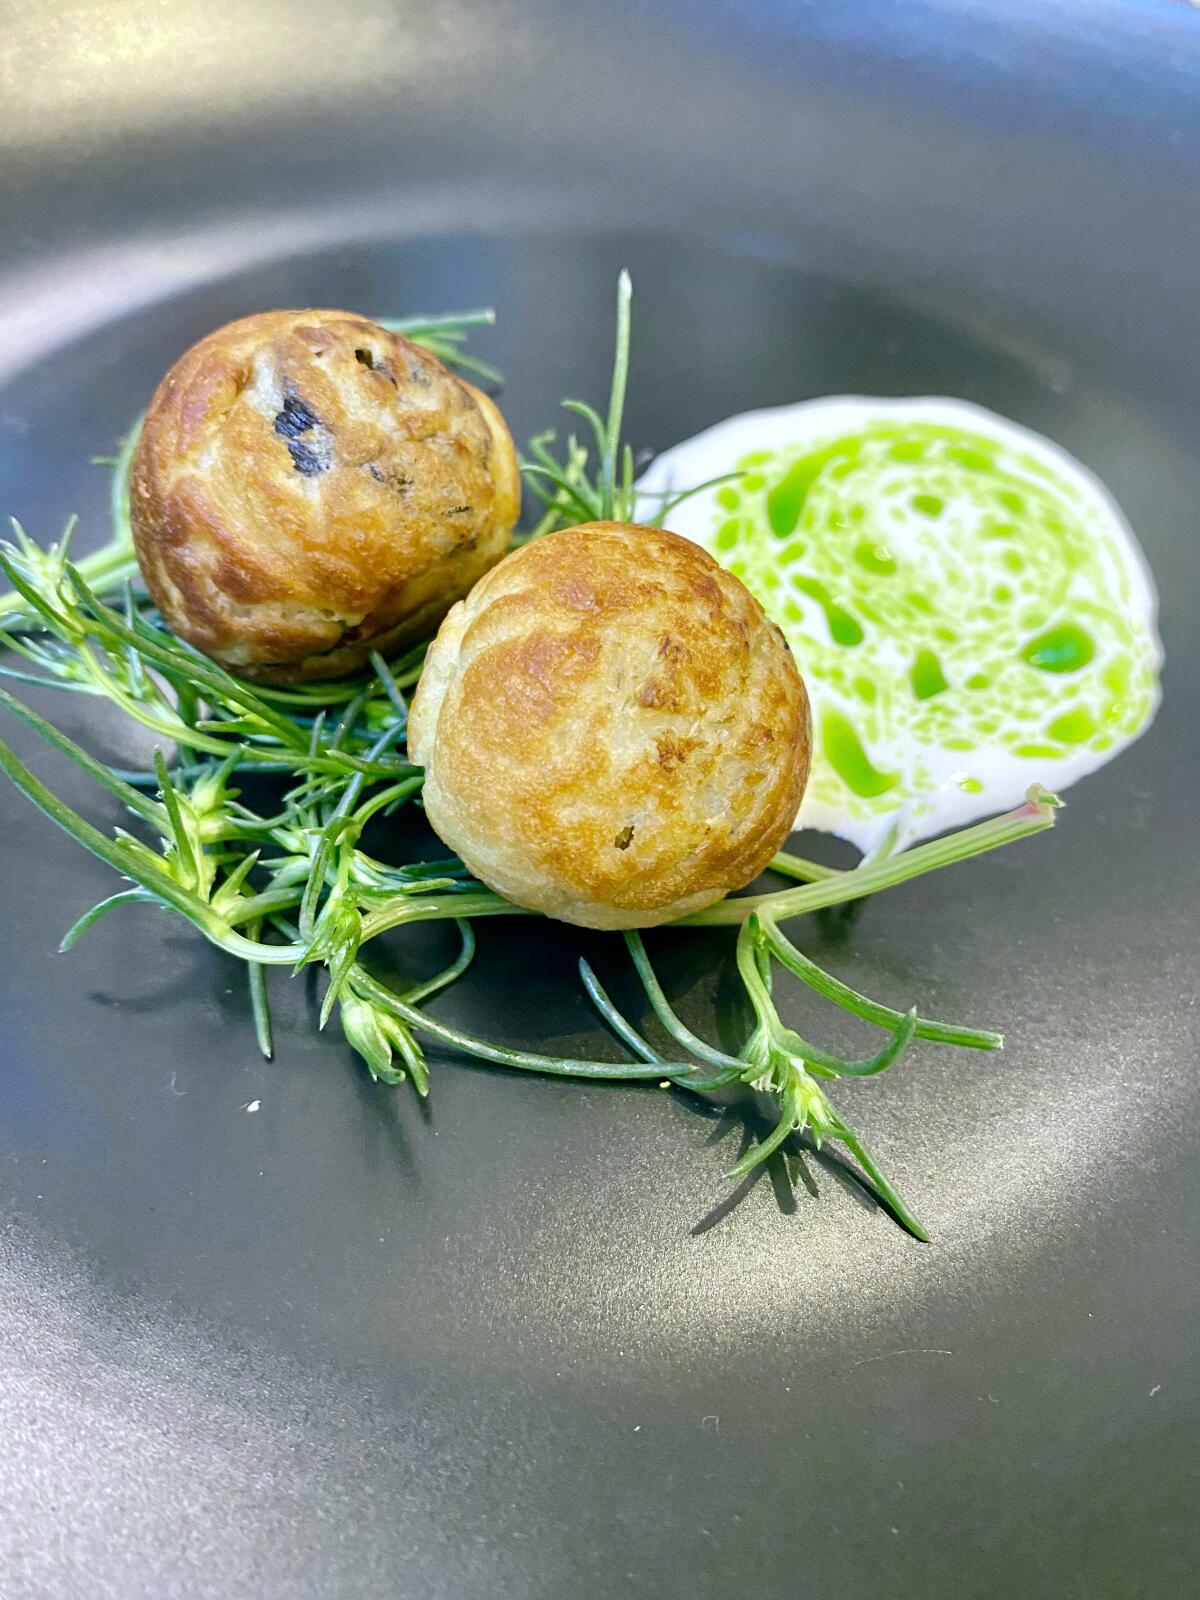 Escargot aebelskivers with sauerkraut, buttermilk and parsley at Popularie at South Coast Plaza on May 31.